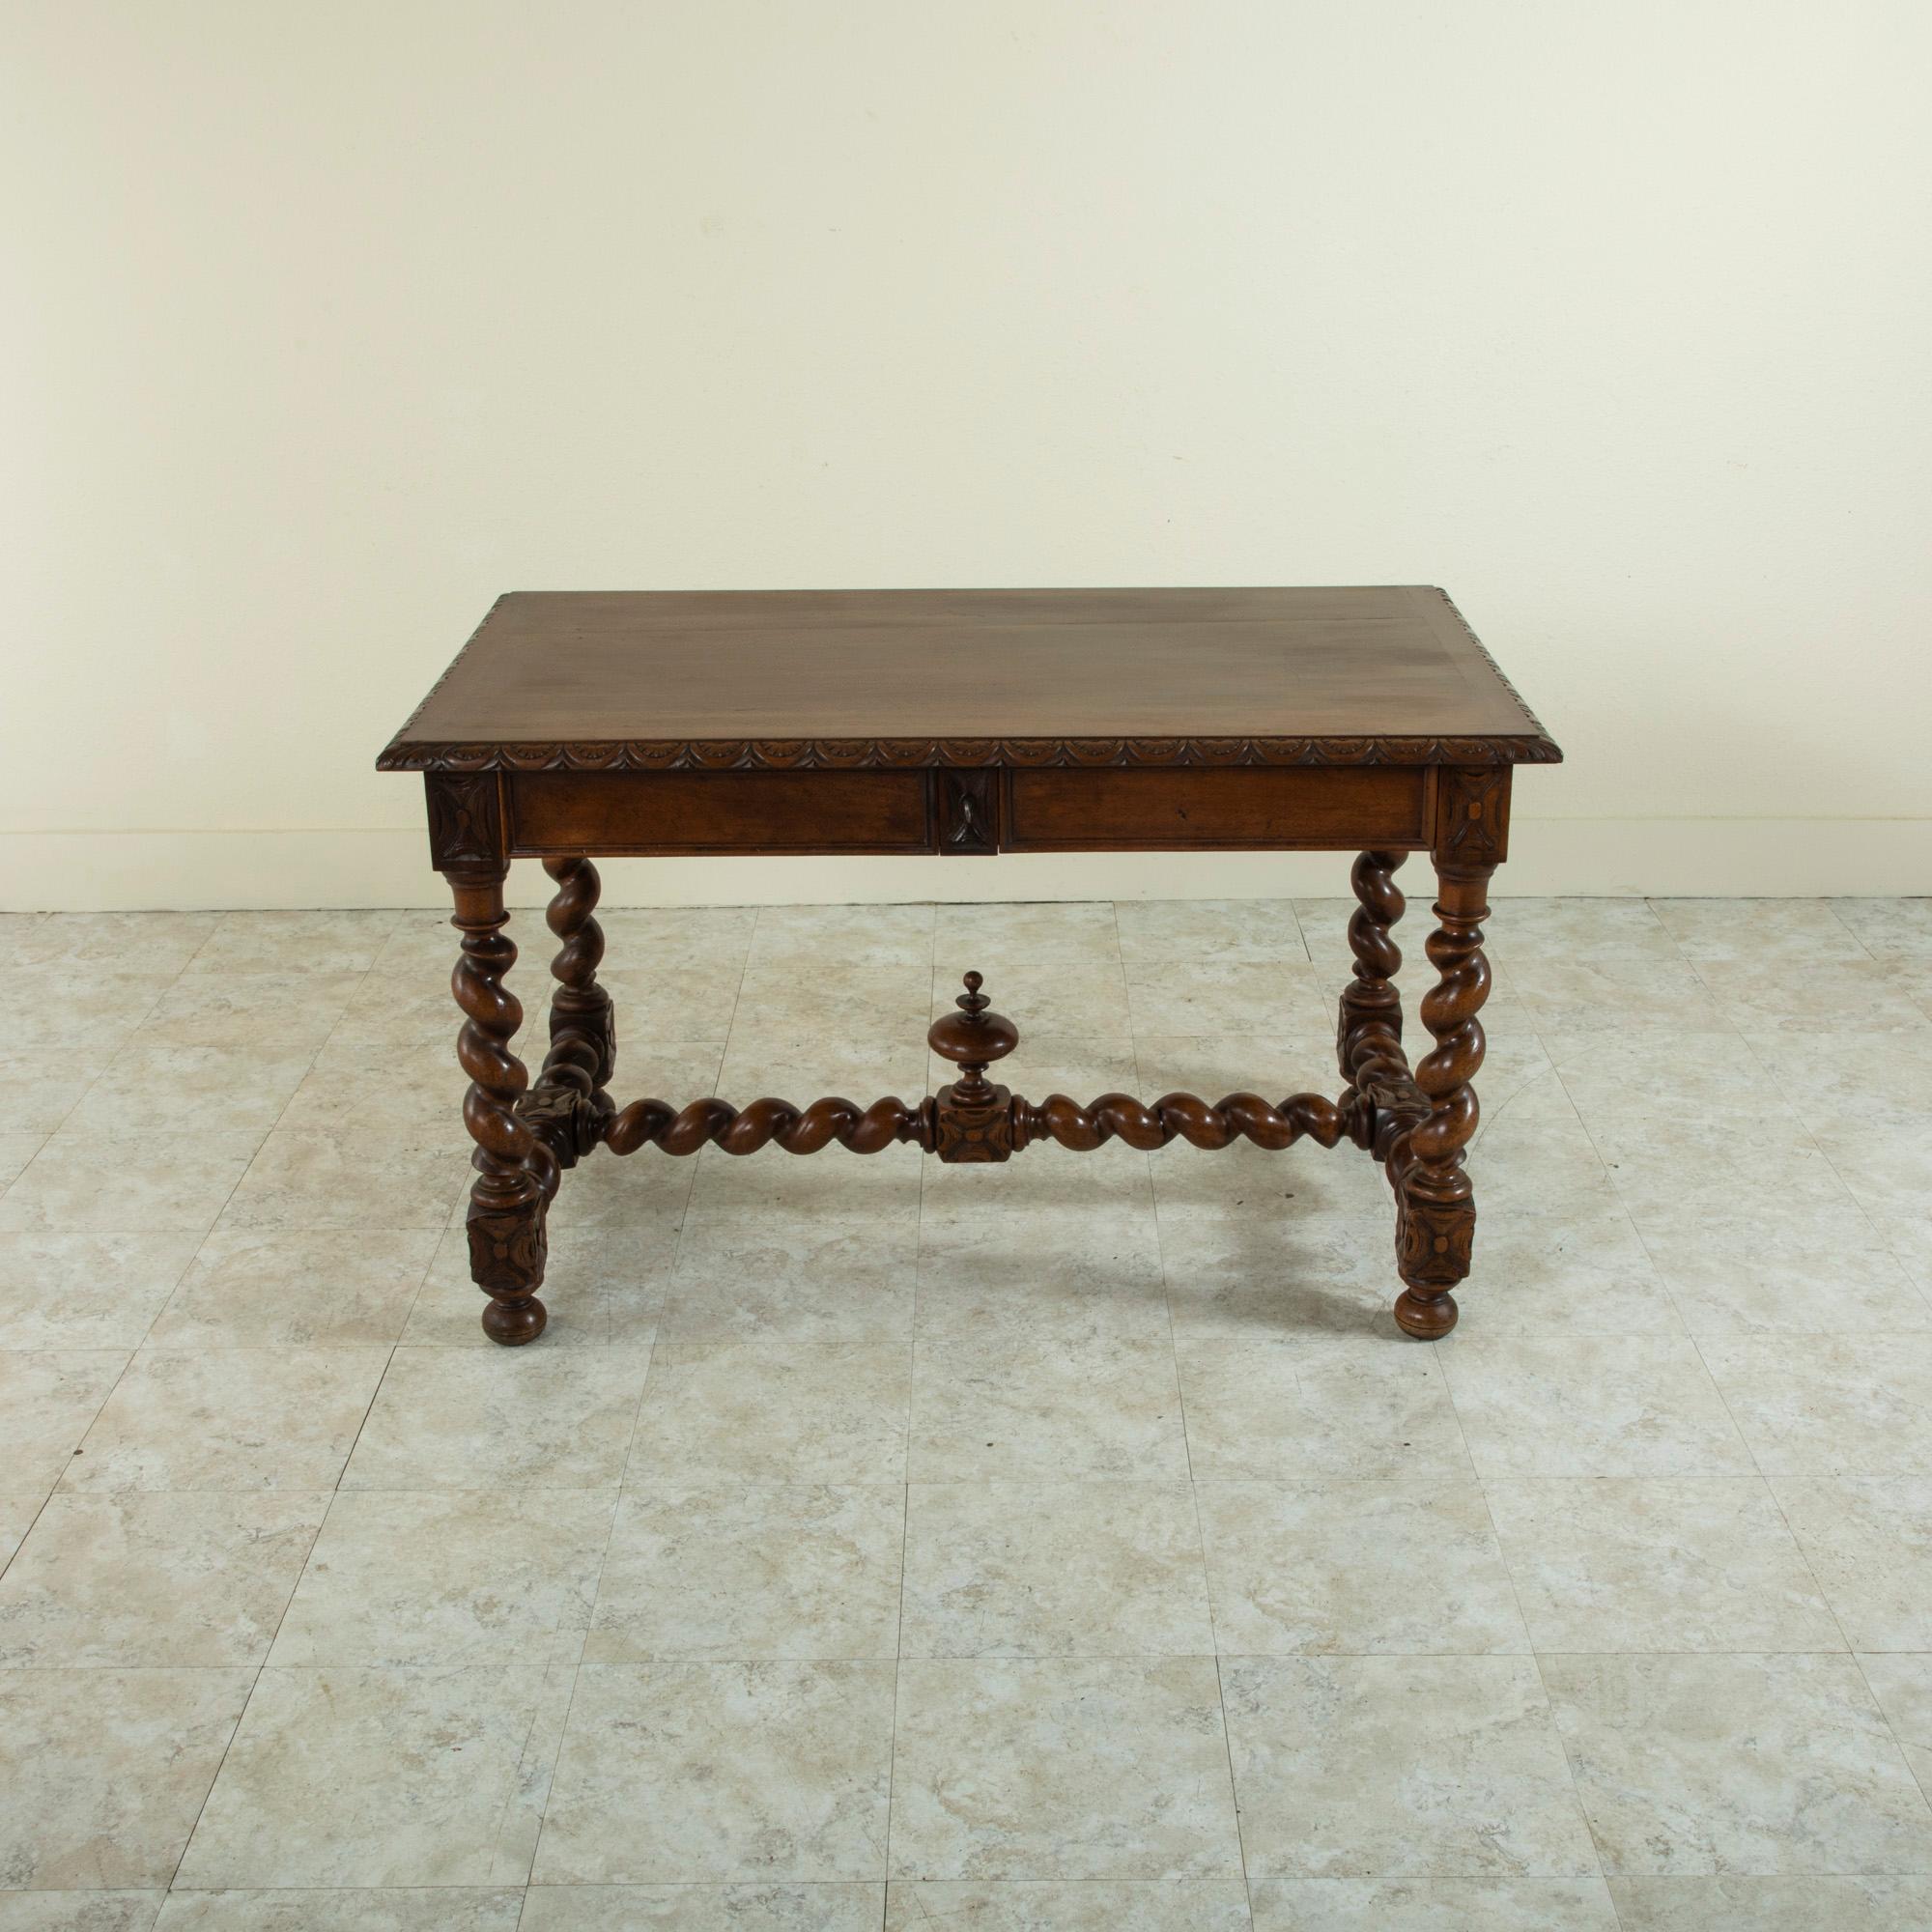 This French Louis XIII style walnut desk from the late 19th century features a hand carved egg and dart pattern around its beveled top and hand-carved rosettes at the corners. Two drawers are concealed in the apron on one side, one with an interior